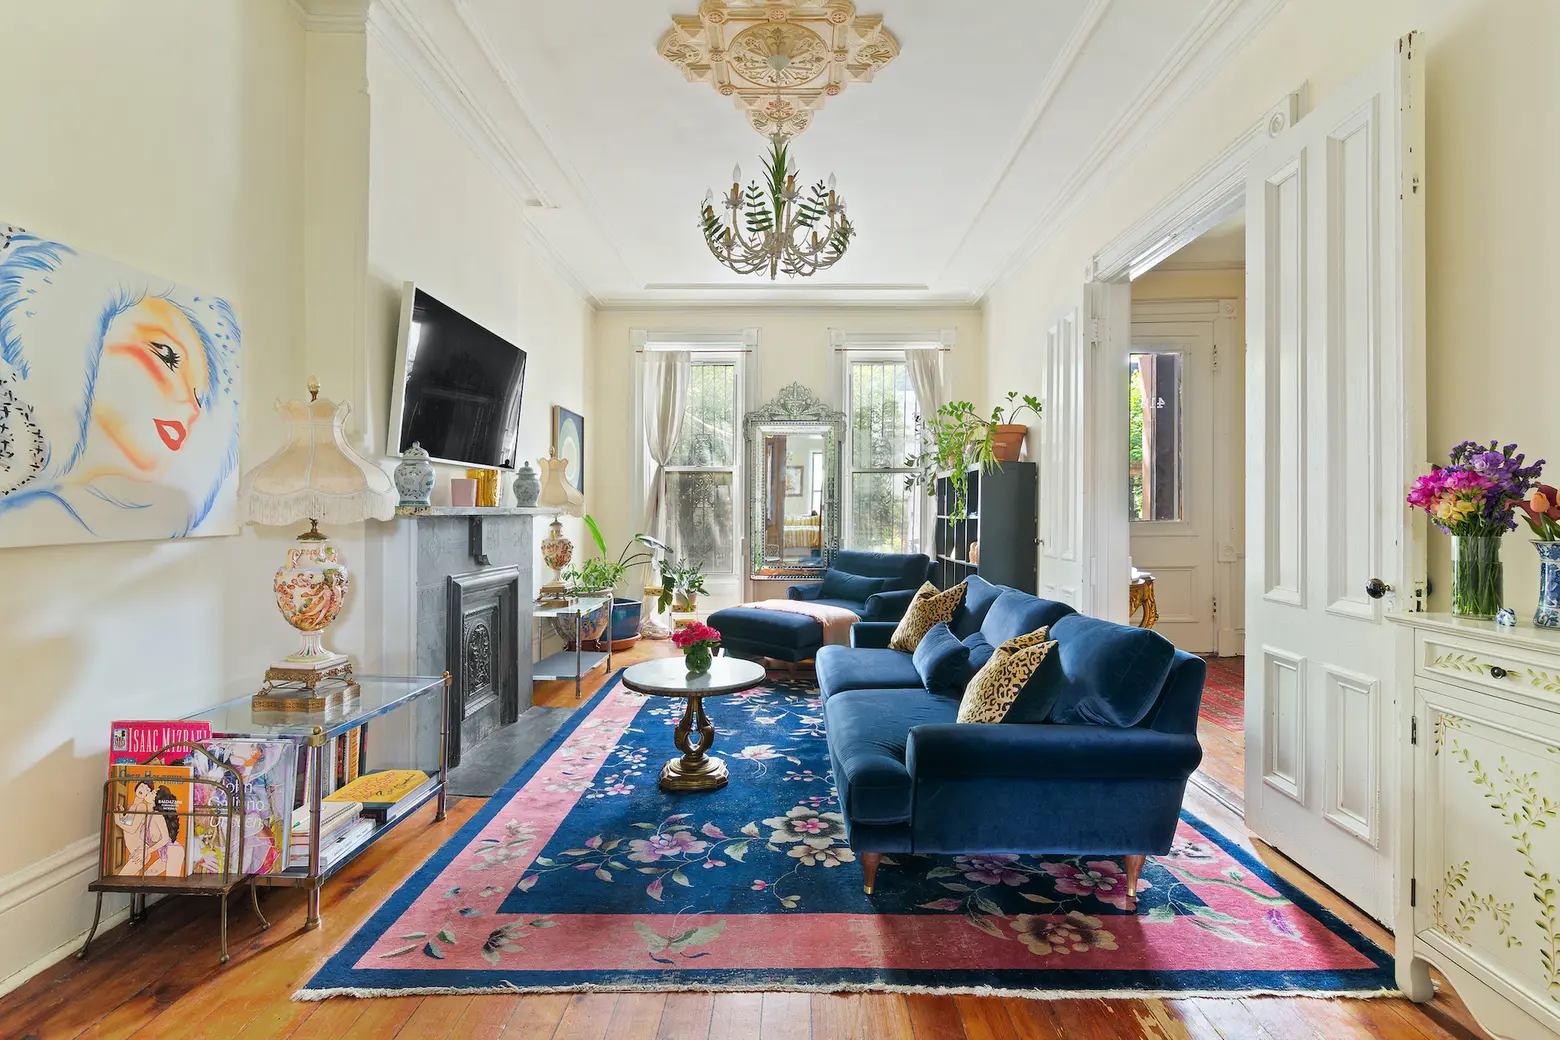 This $1.65M Bed-Stuy brownstone is both renovation-ready and adorable as-is